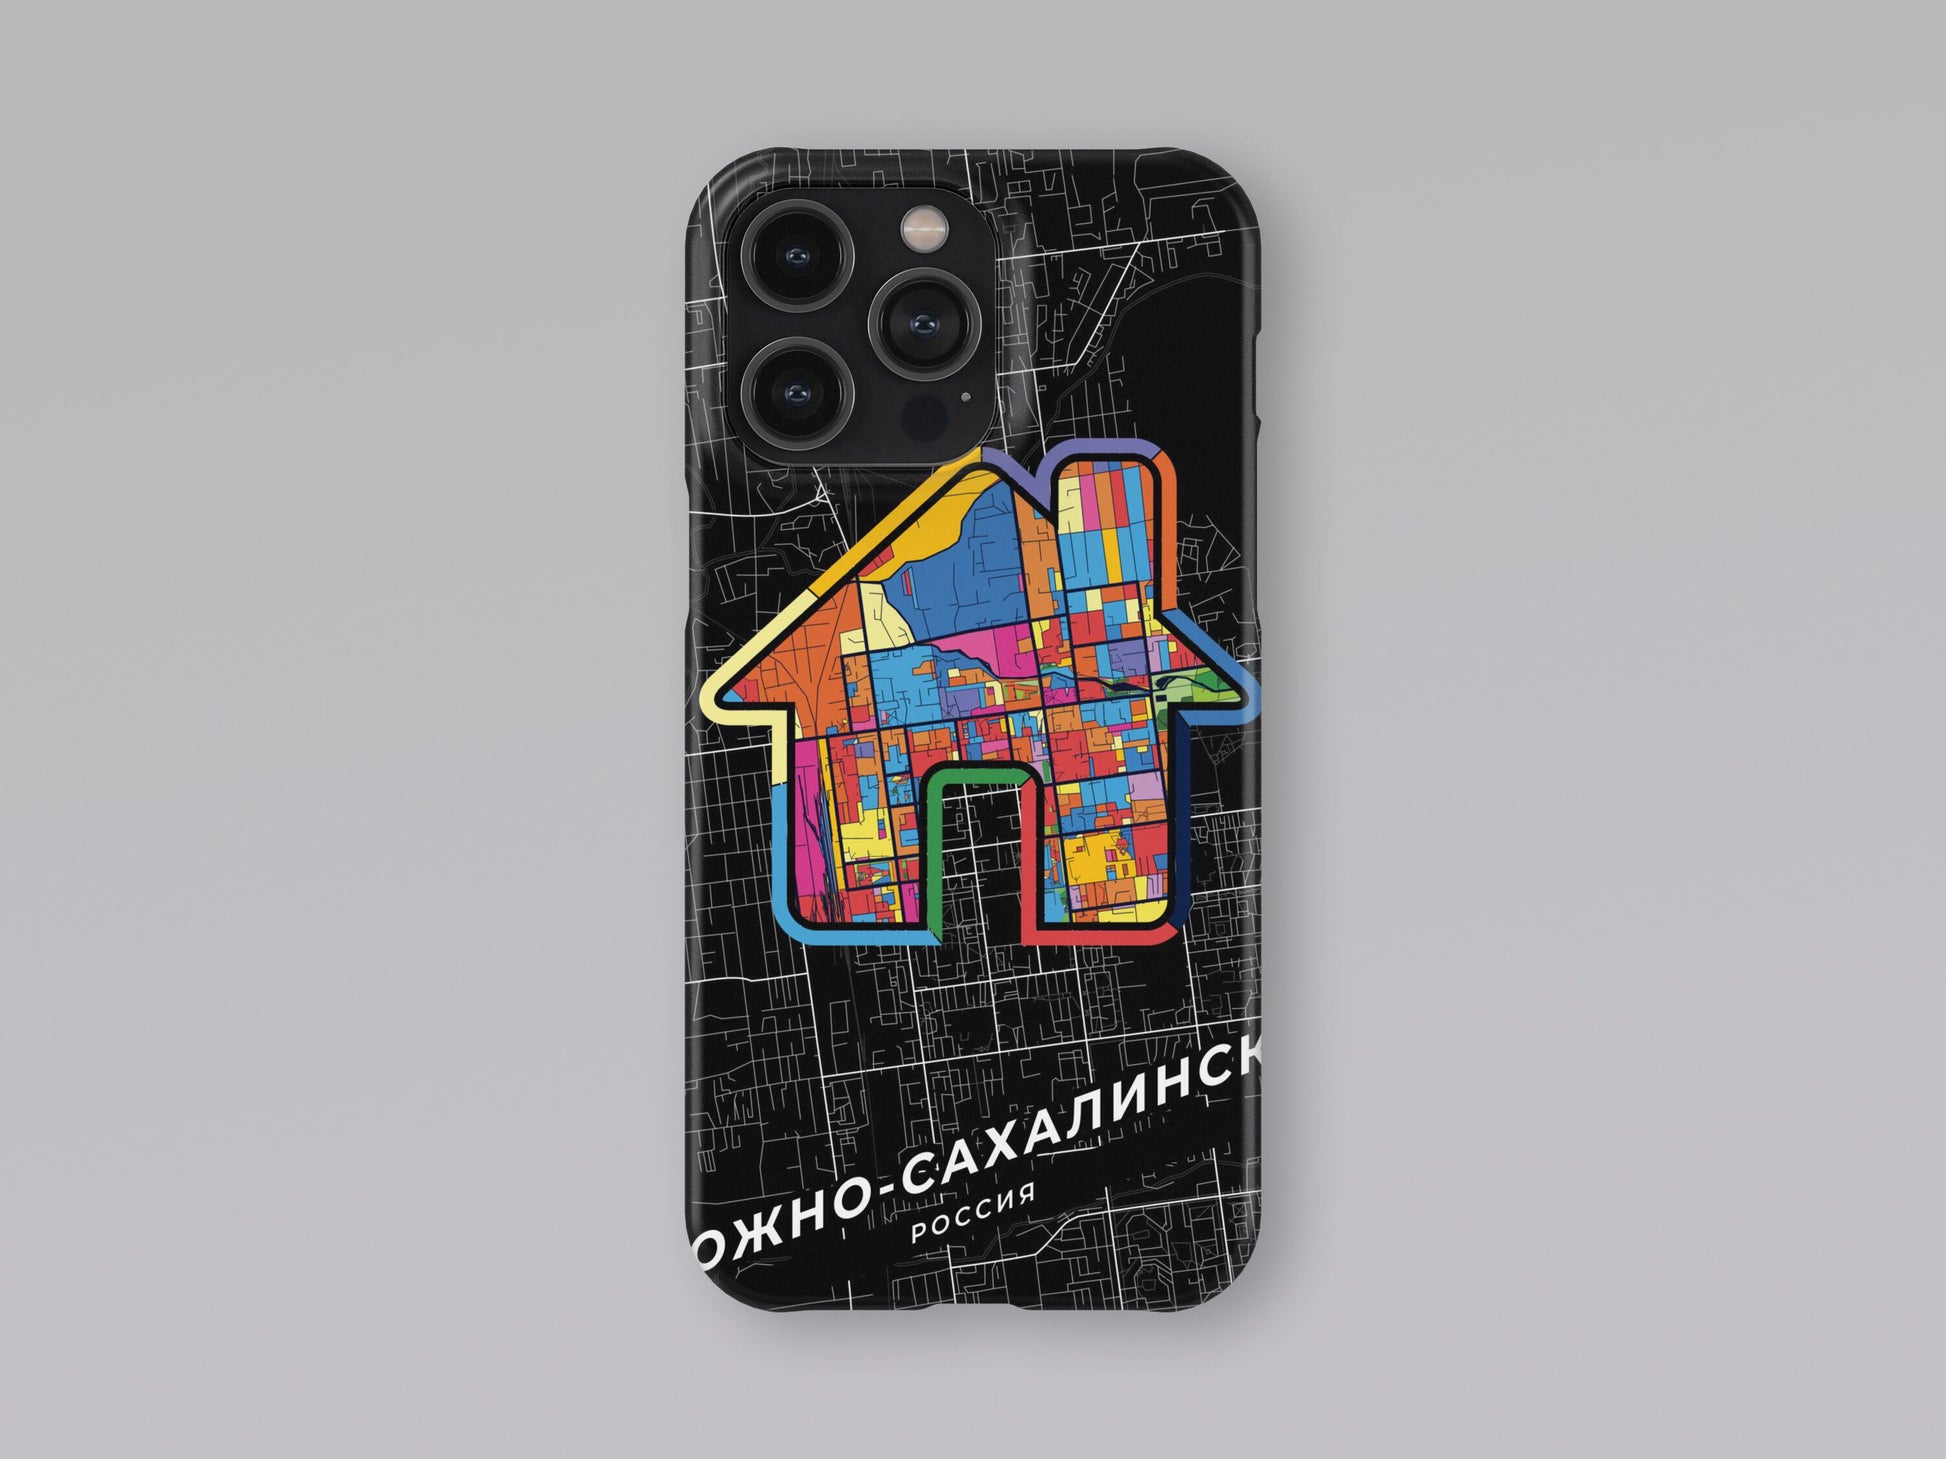 Yuzhno-Sakhalinsk Russia slim phone case with colorful icon 3